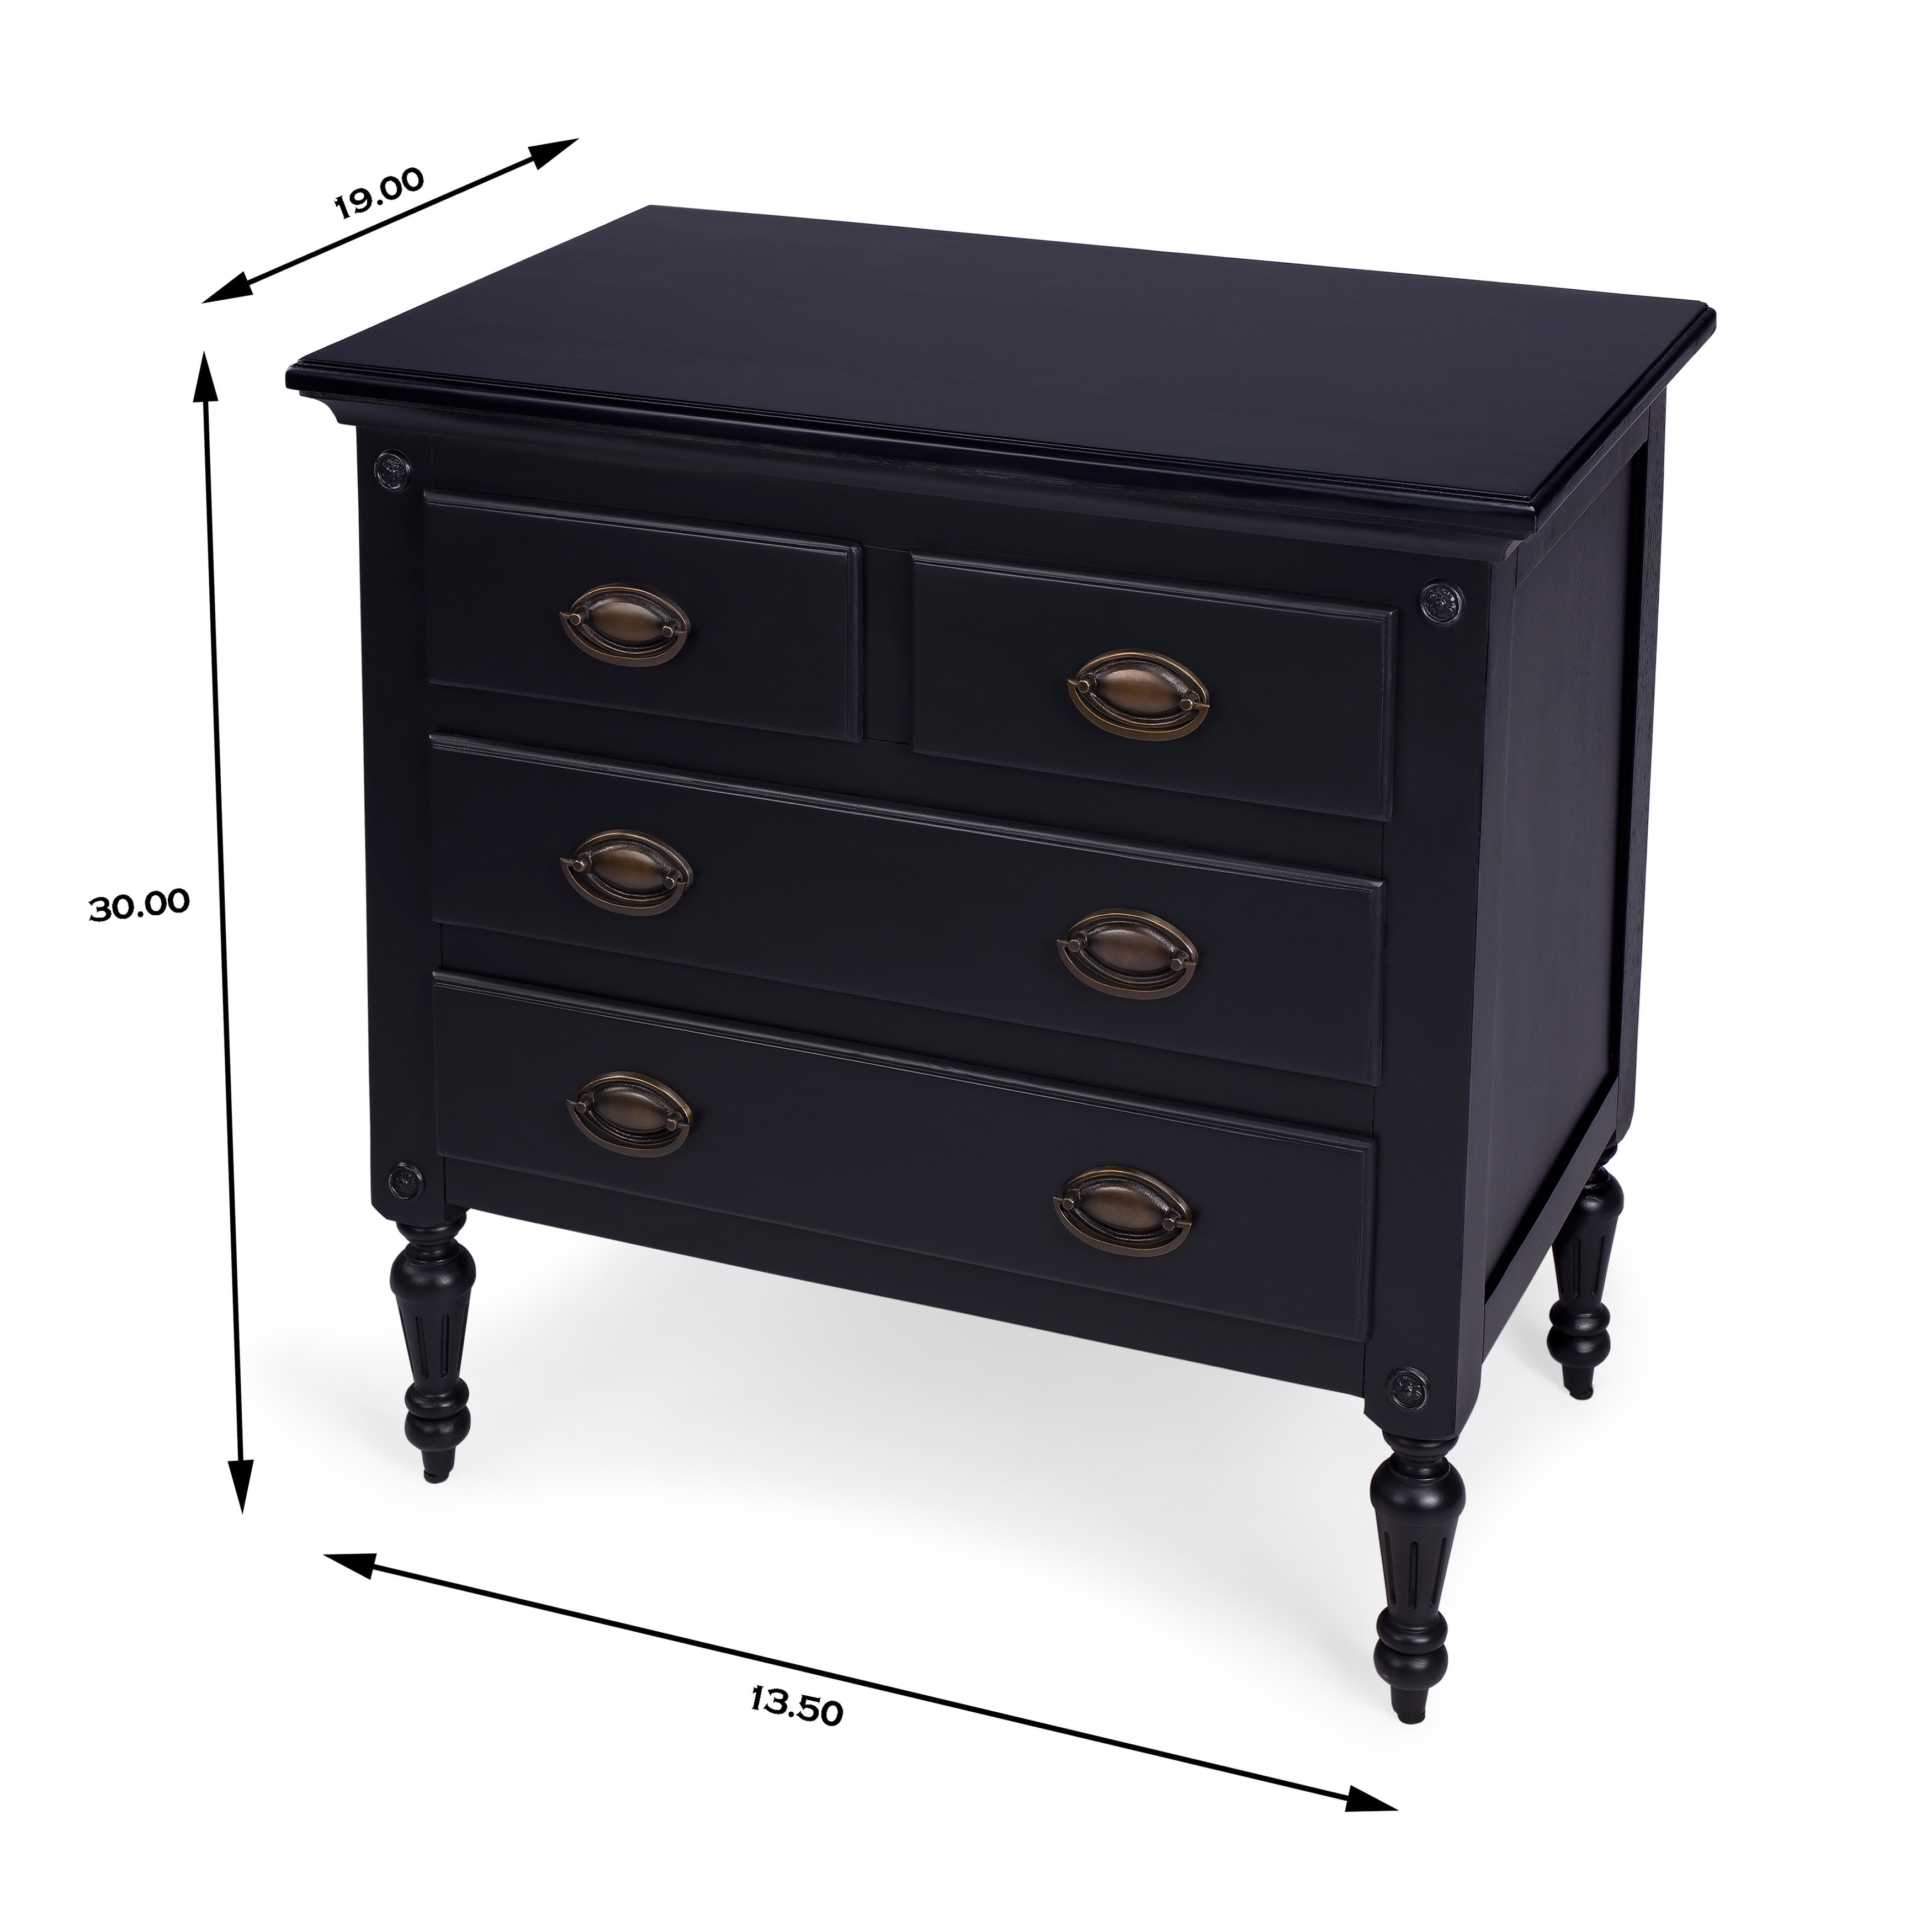 Easterbrook 4-Drawer Accent Chest